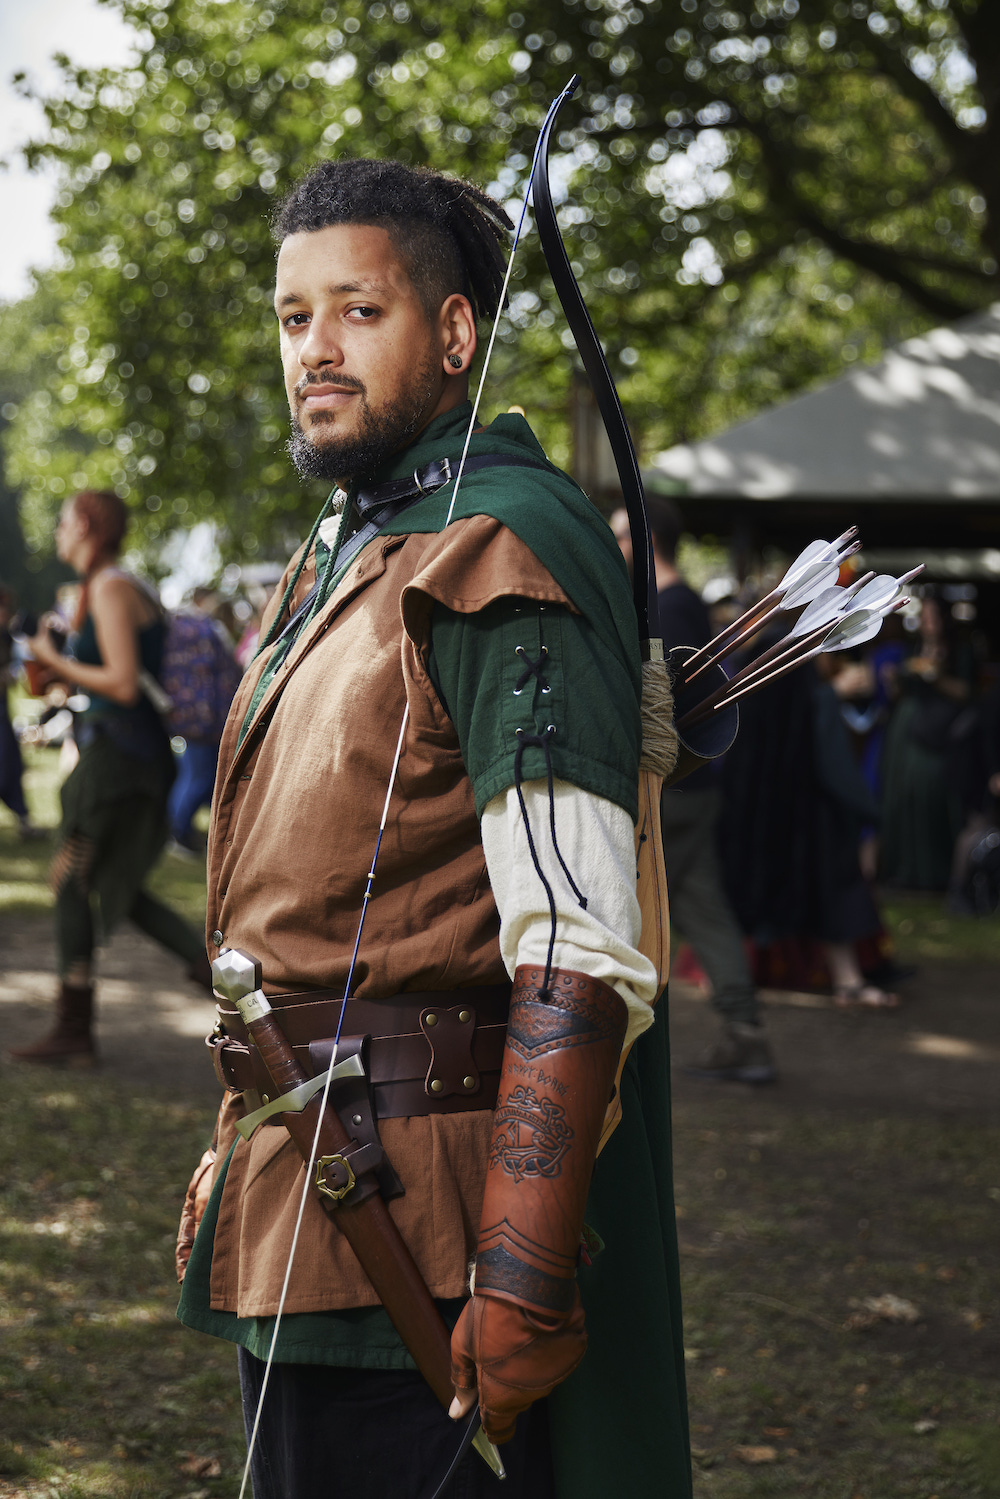 Castlefest medieval festival - man with dar skin and eyes, and dreadlocks, he's dressed in brown and green and carries a bow with arrows, a sward and leather accessories